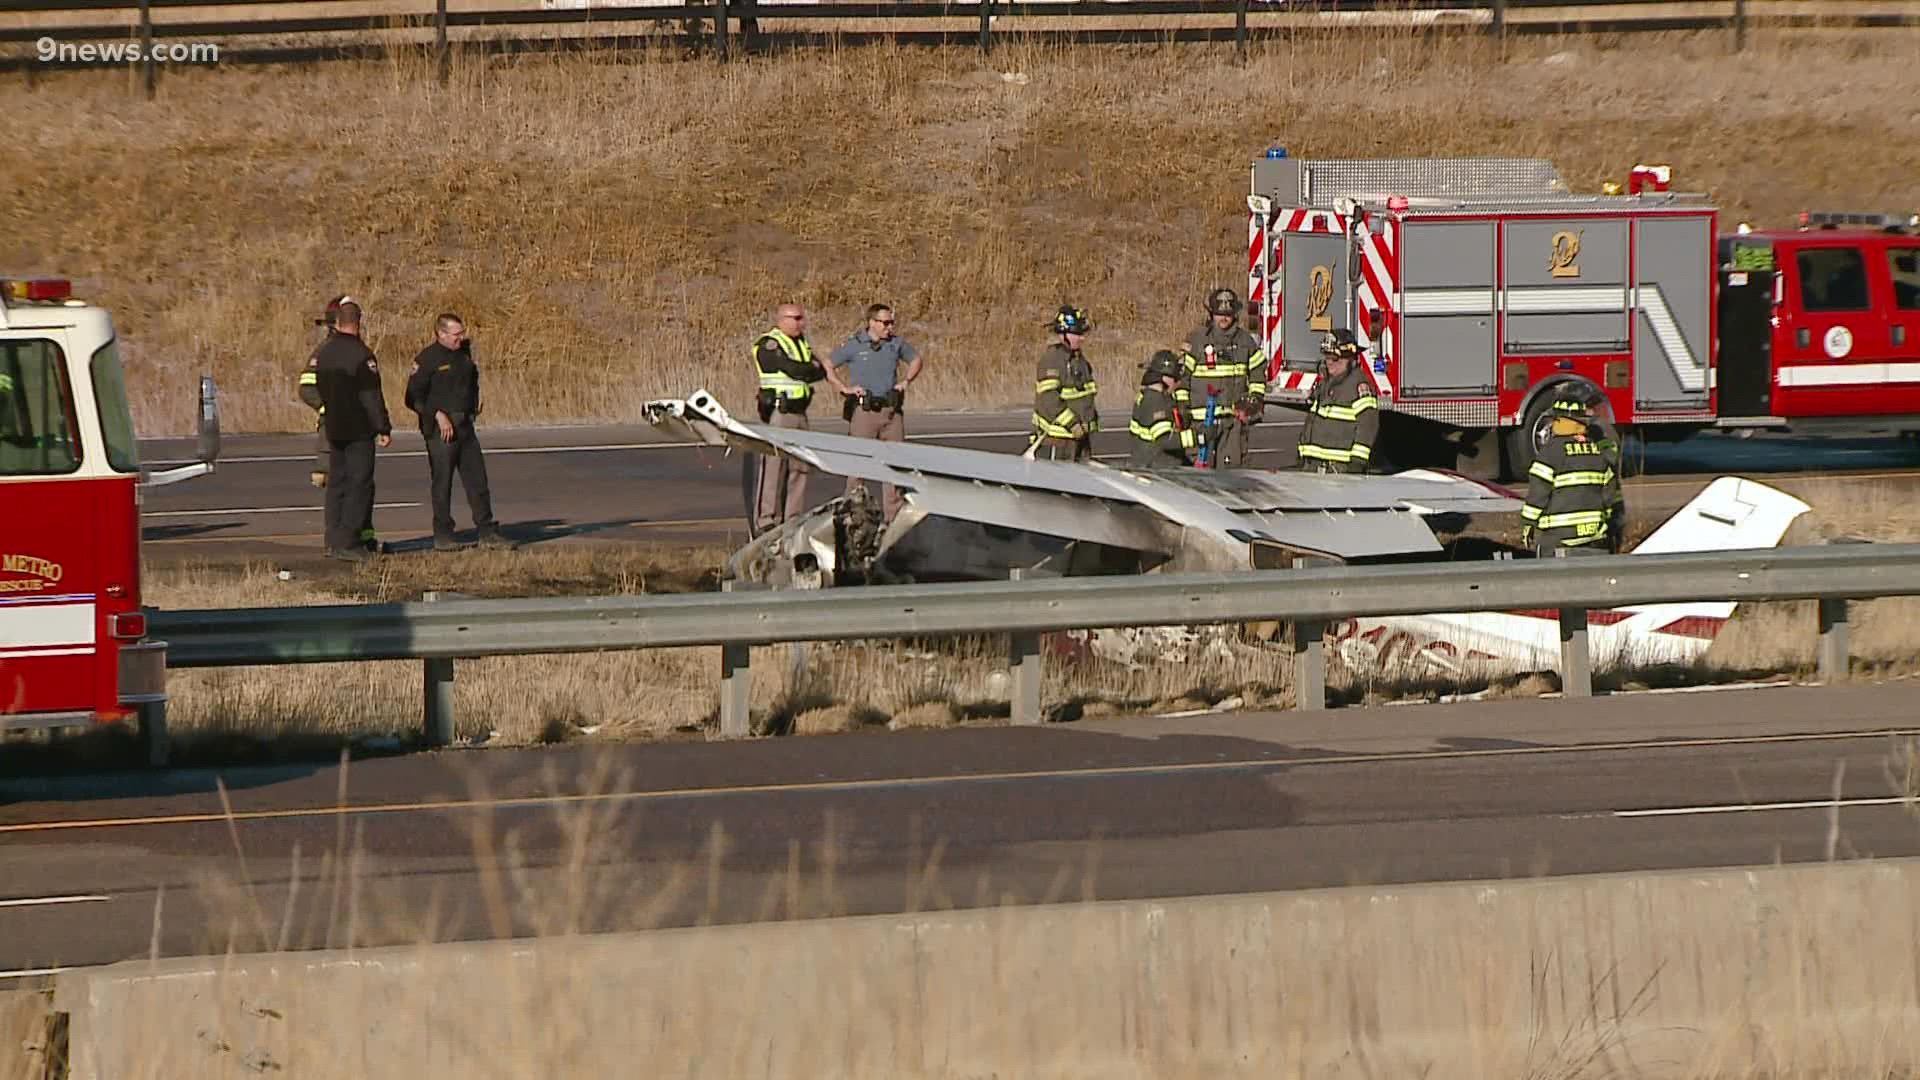 The plane landed in the median of E-470 at Jamaica Road, South Metro Fire Rescue said. The two people on board were taken to the hospital with minor injuries.